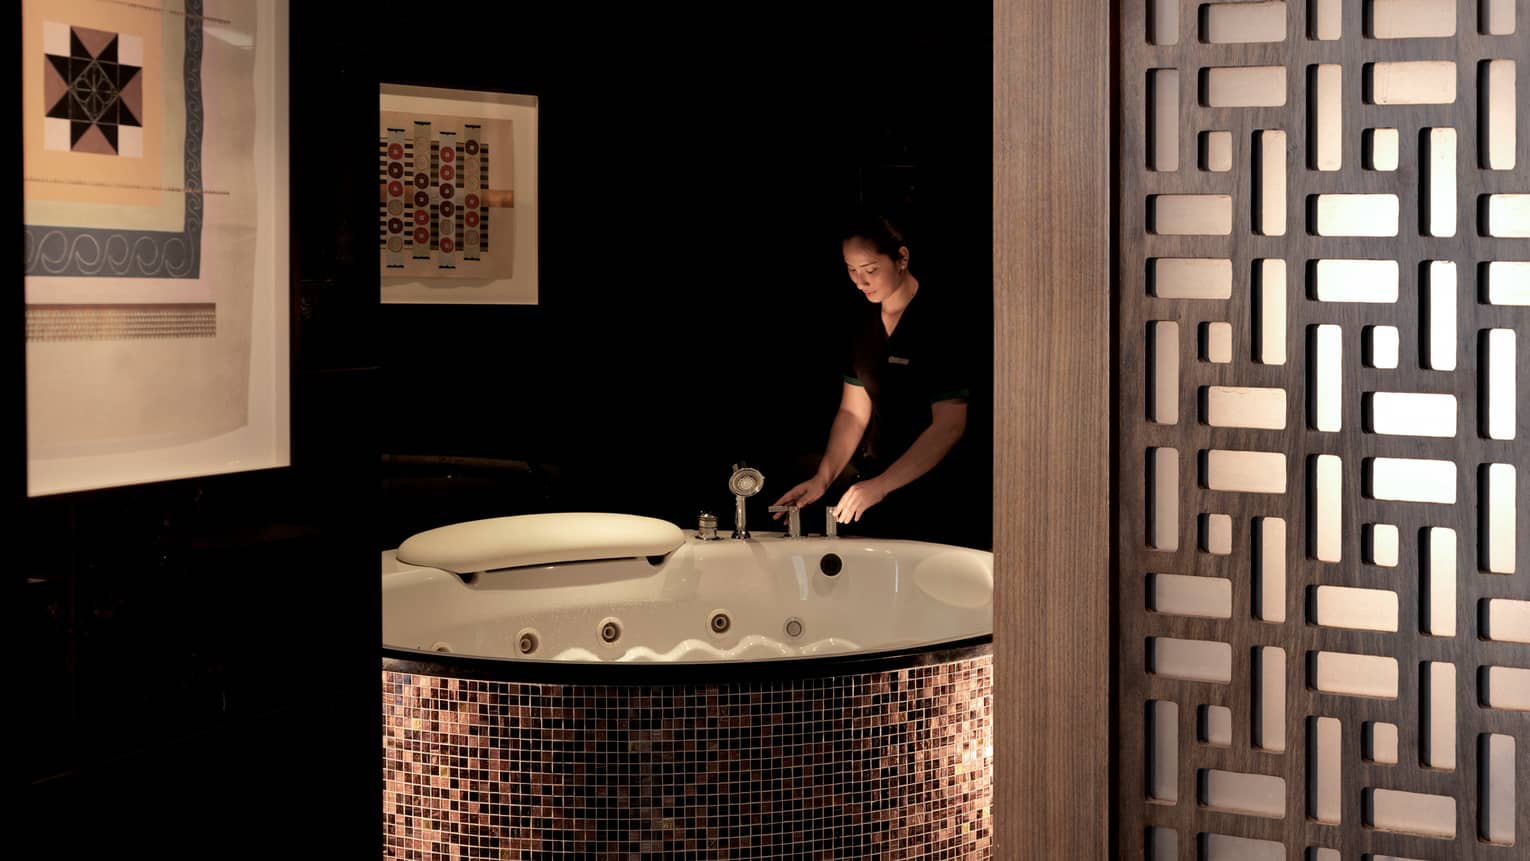 Woman holds taps of large round bathtub with tiles in dimly-lit spa room with wood room divider